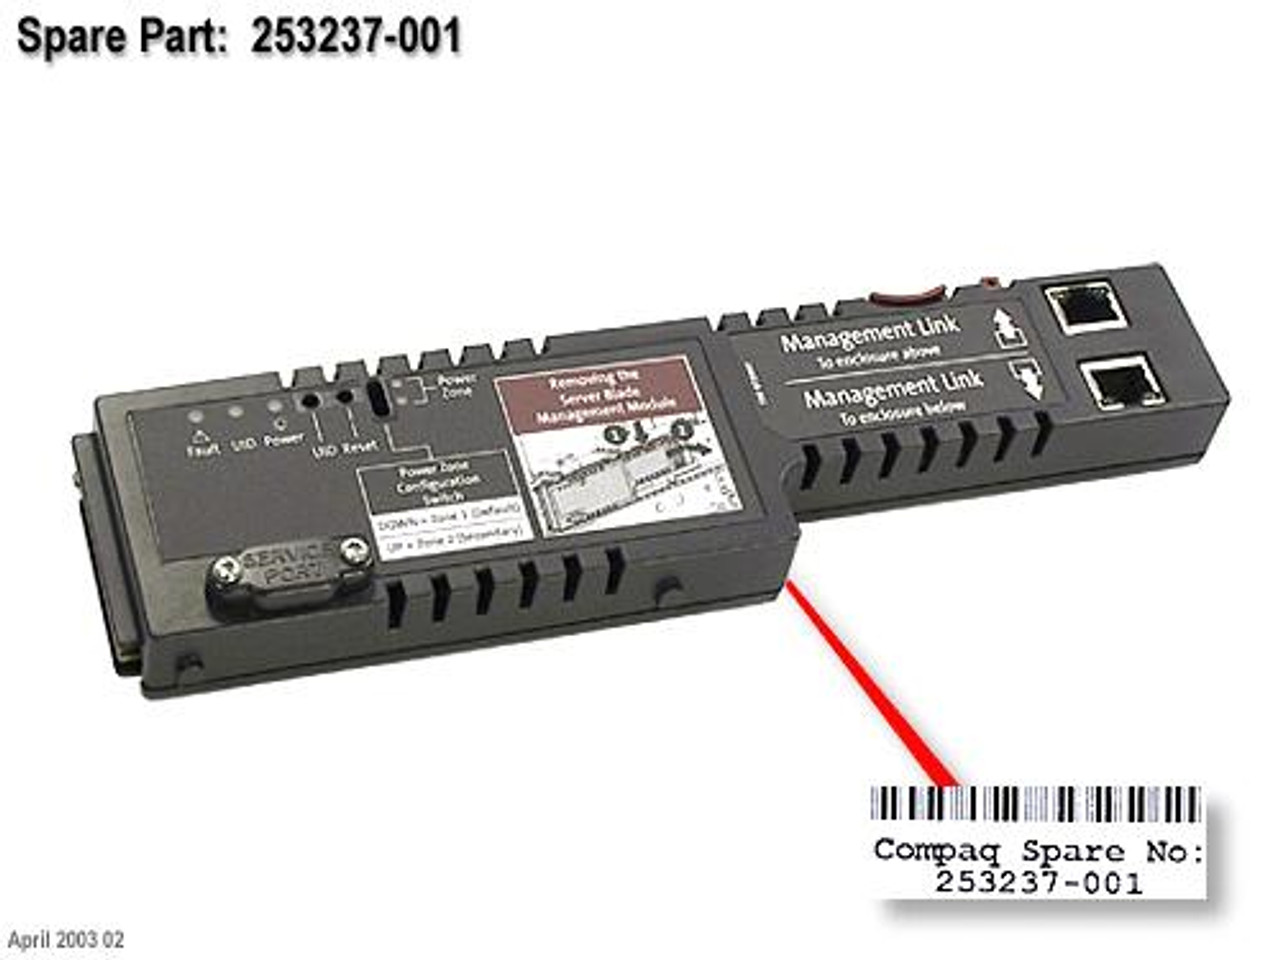 SPS-BD MGMT CARD; INSERT - 253237-001